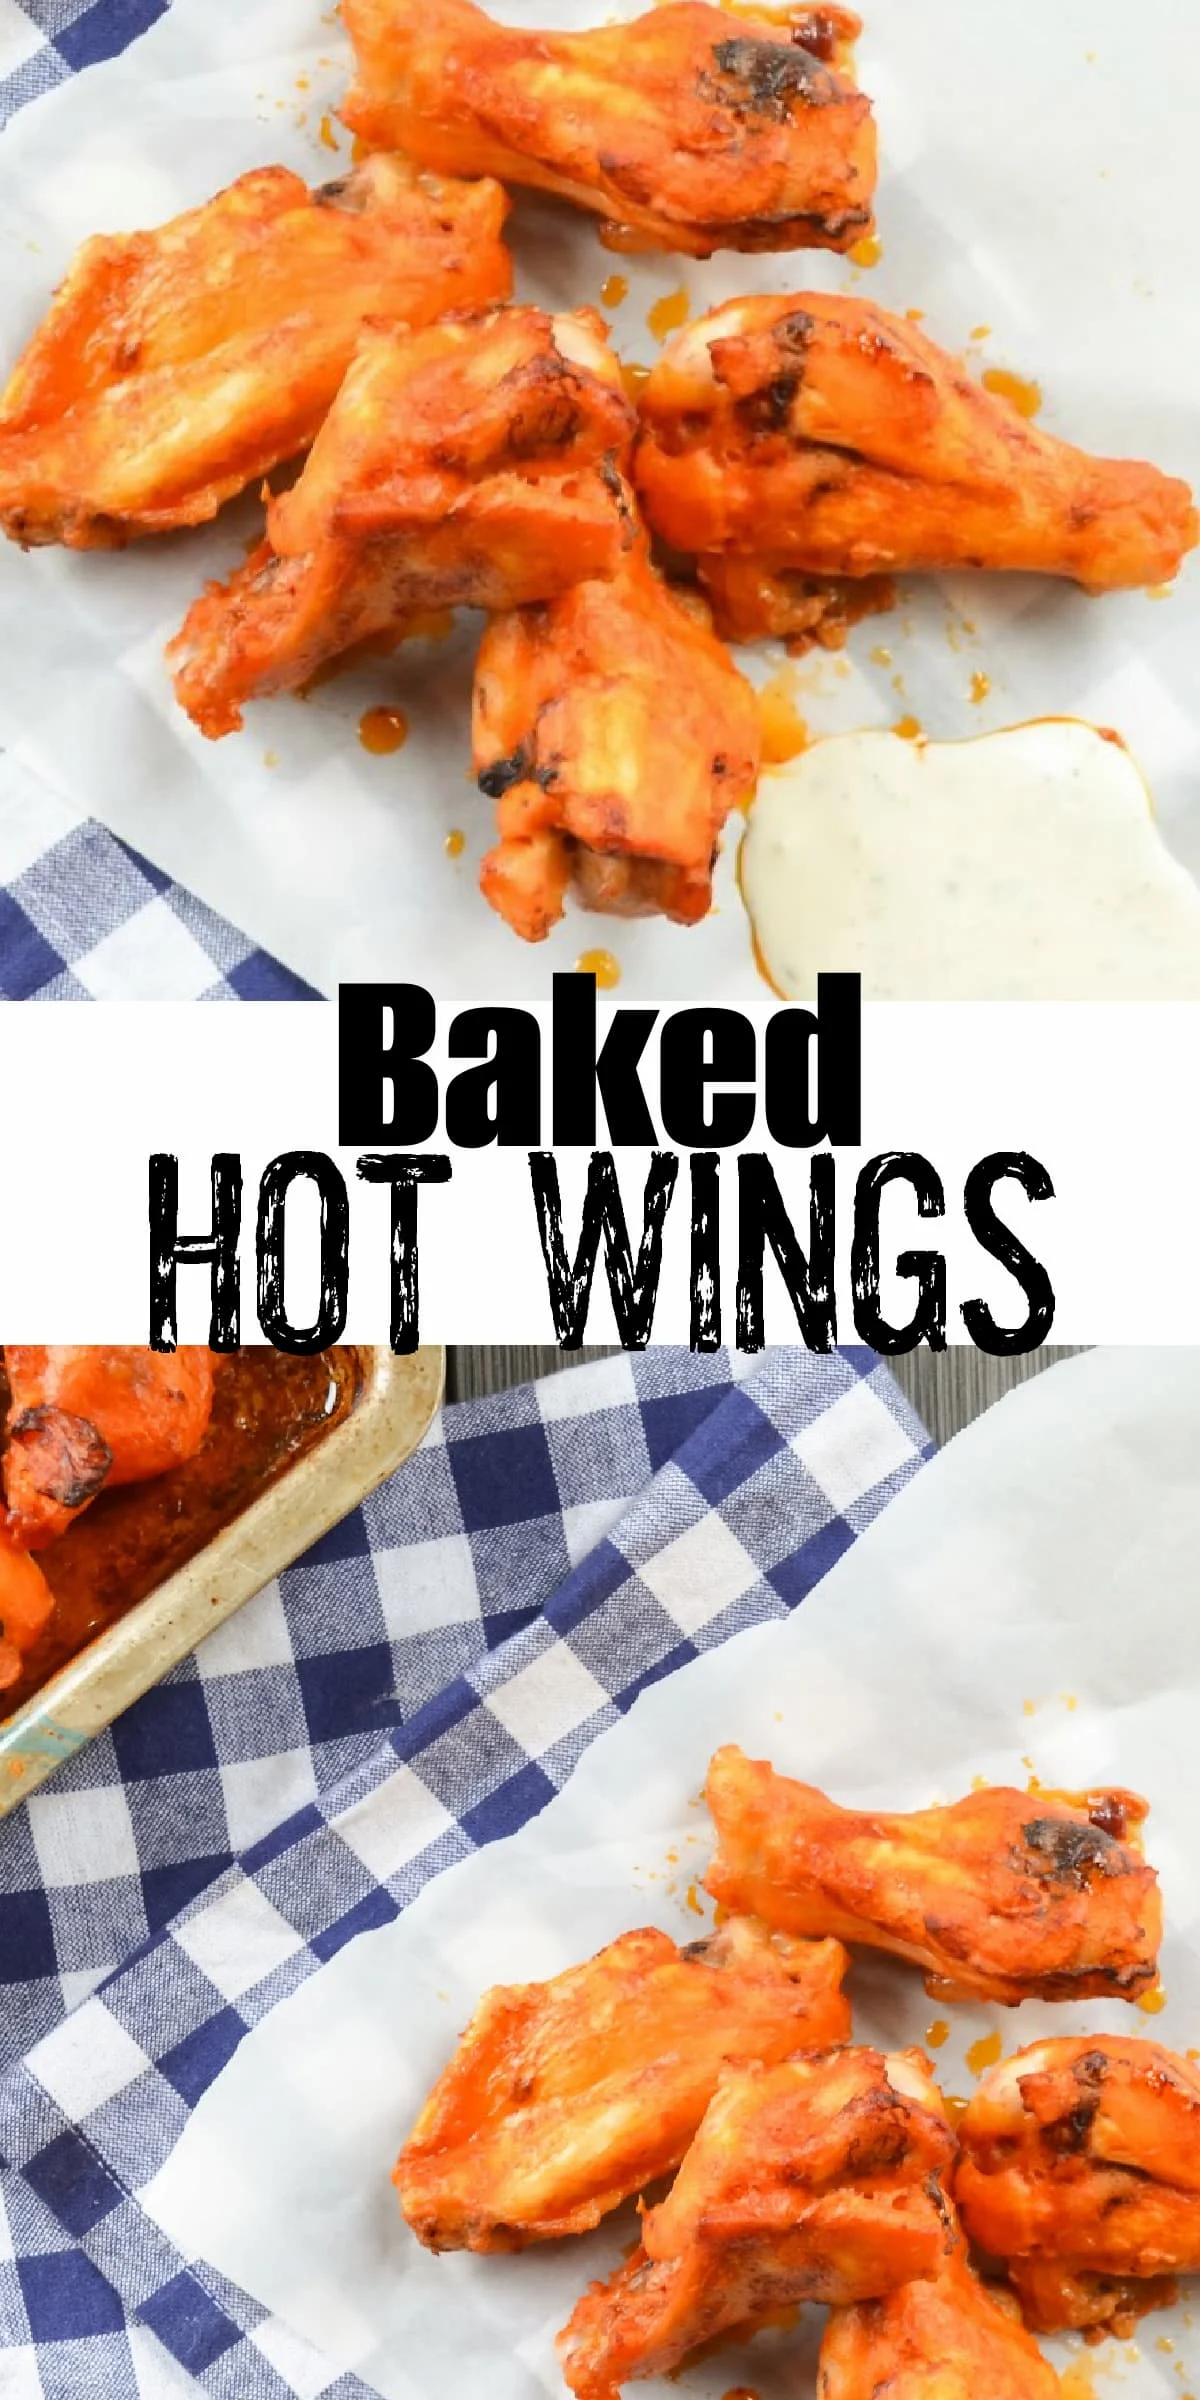 2 photos of Baked Hot Wings on white parchment paper one a blue checkered cloth. There is black text between the two photos Baked Hot Wings.